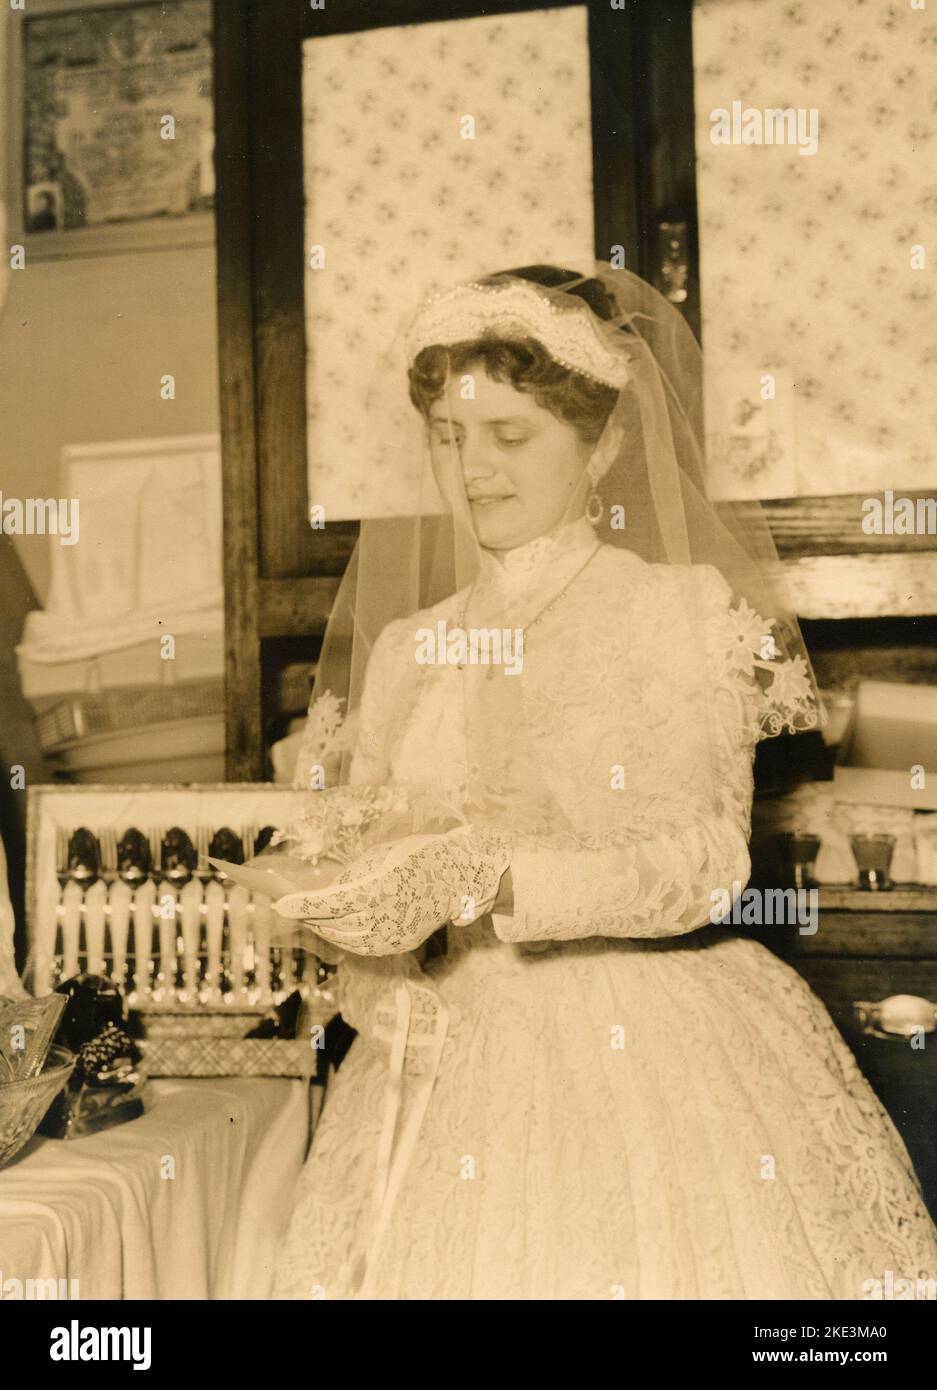 Wedding in a village in central Italy: The Bride at home with the presents, 1950s Stock Photo